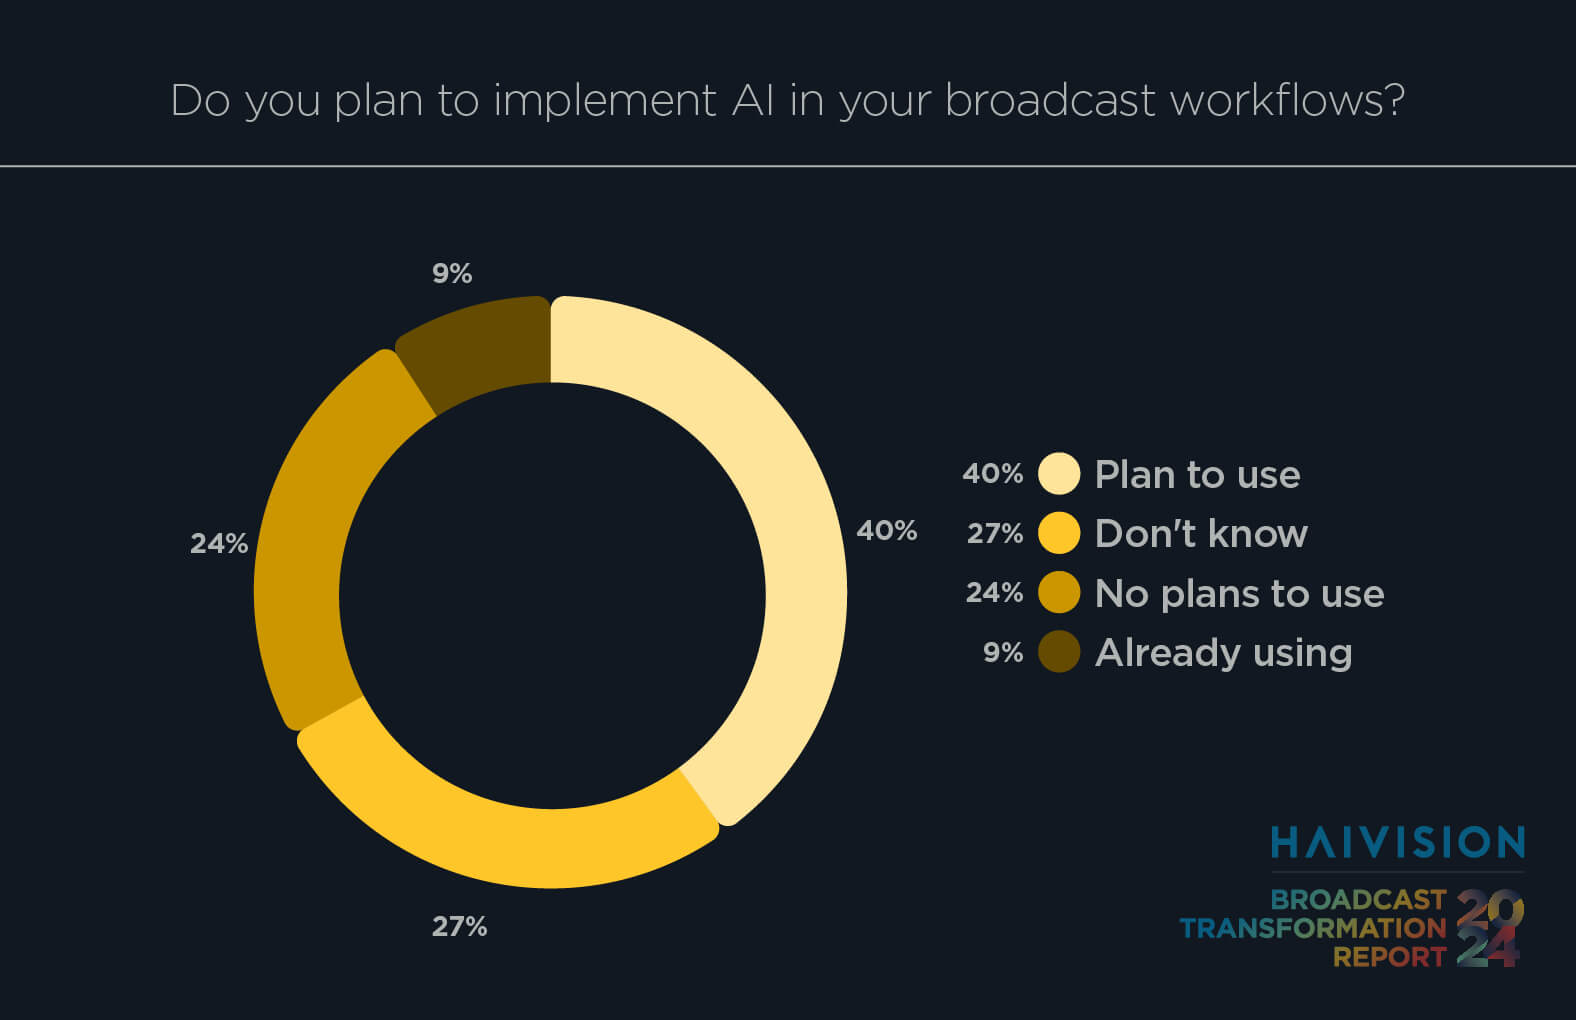 Do you plan to implement AI in your broadcast workflows?